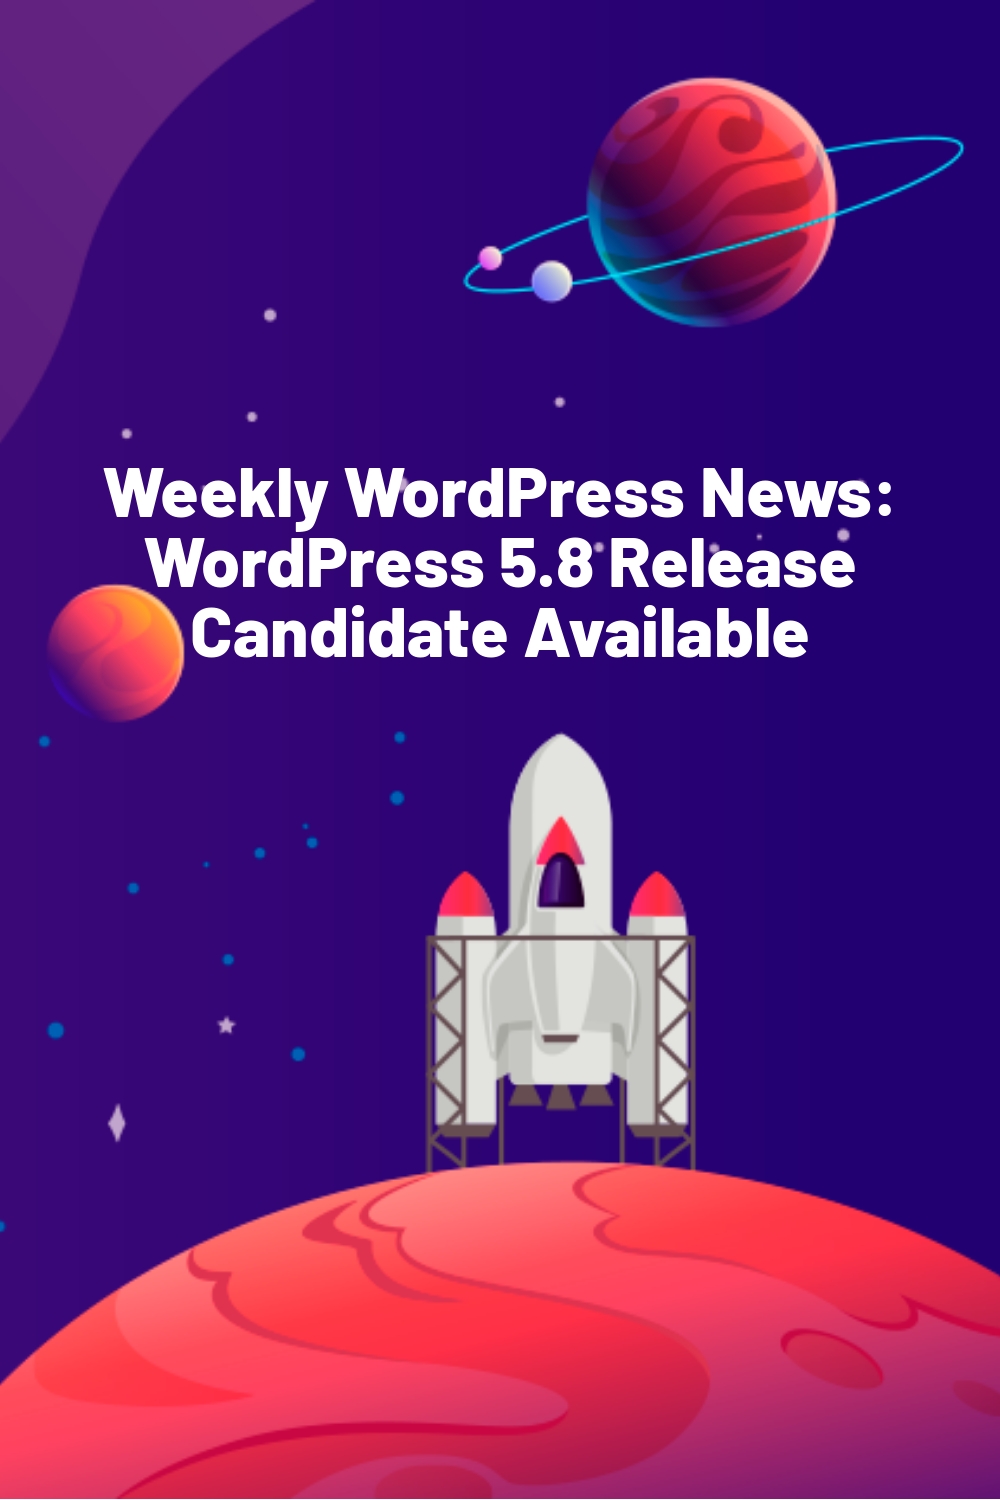 Weekly WordPress News: WordPress 5.8 Release Candidate Available